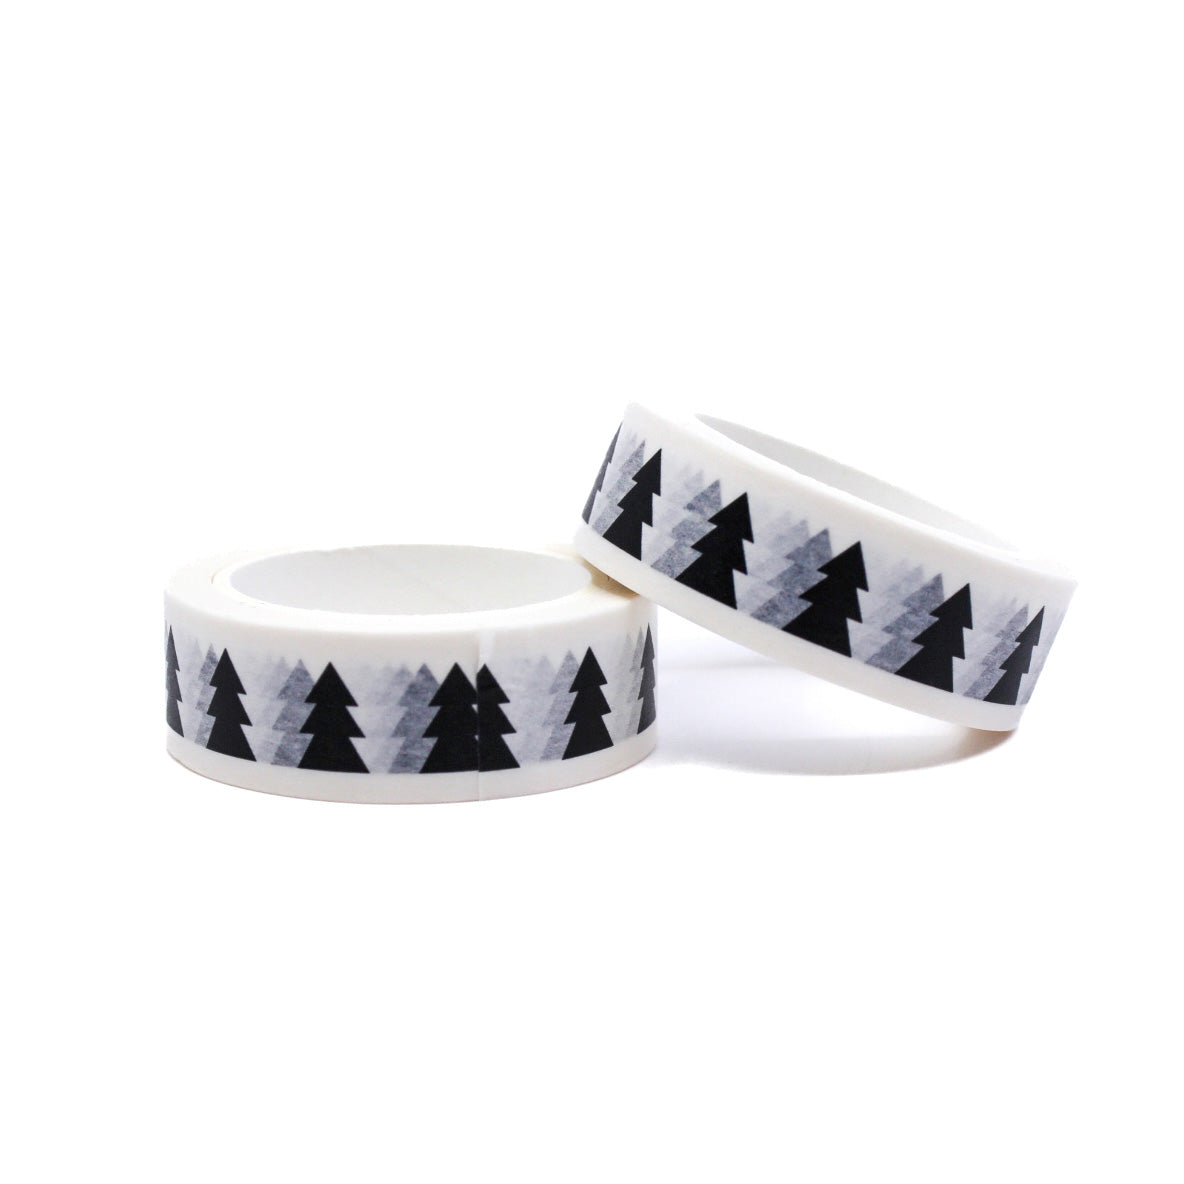 Black and White Nordic Holiday Pine Tree Washi Tape, featuring a charming winter design with stylized pine trees, ideal for adding a touch of Scandinavian elegance to your festive crafts and holiday-themed projects. This tape is from Worthwhile Paper and sold at BBB Supplies Craft Shop.